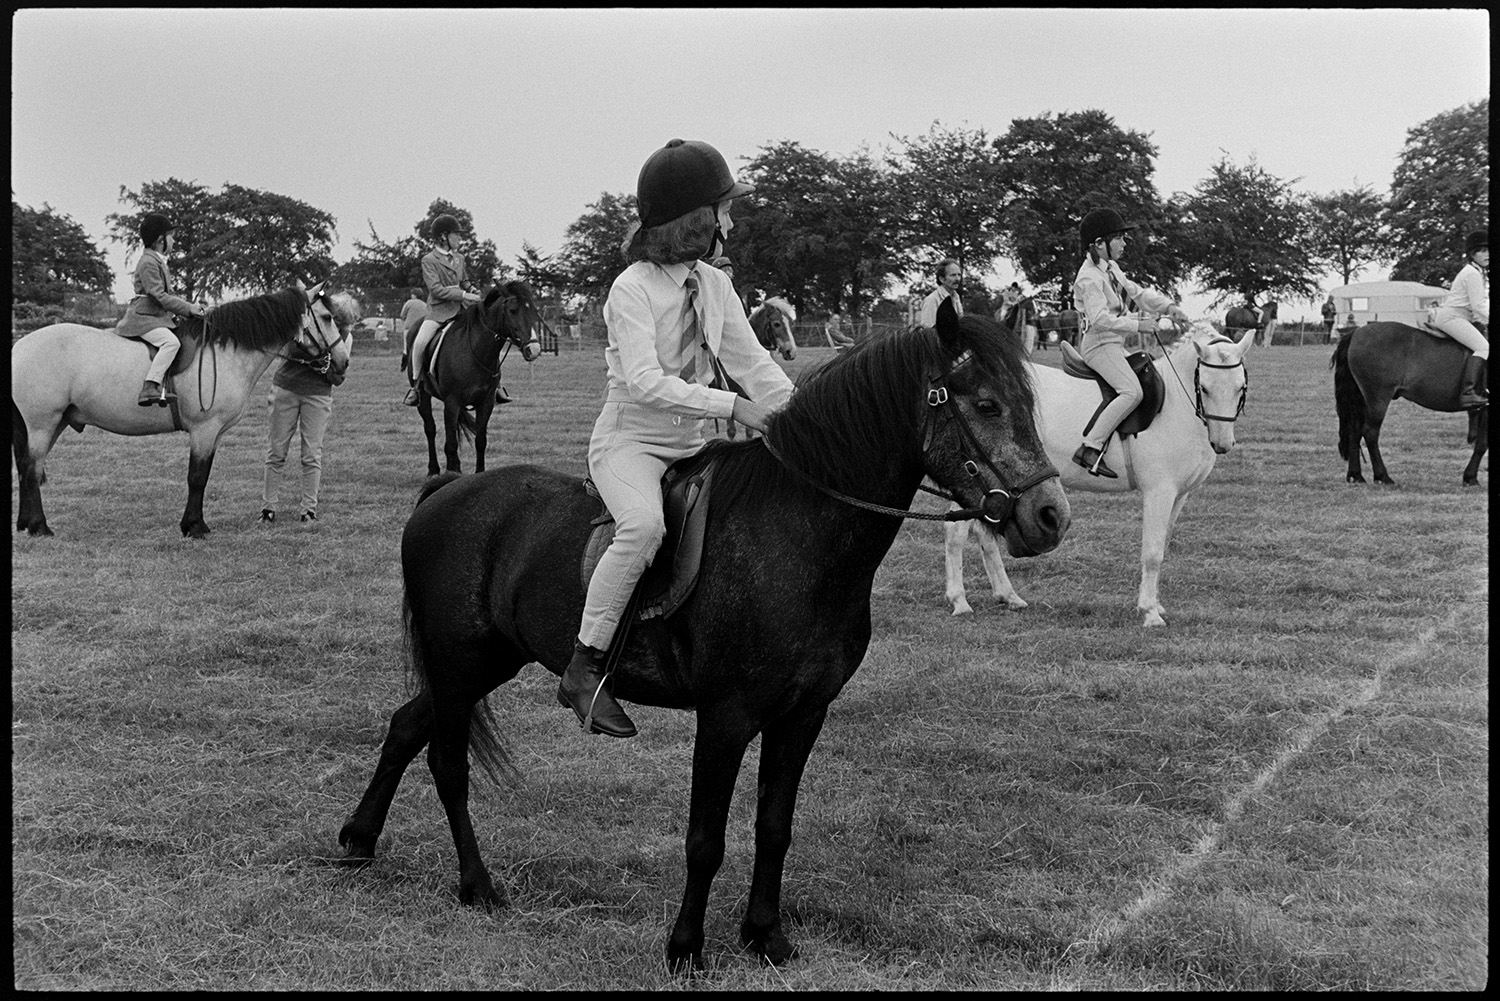 Gymkhana at Fair, horses, ponies and riders. Old bus. 
[Children on horses getting ready to compete in an event at the gymkhana at Winkleigh Fair.]